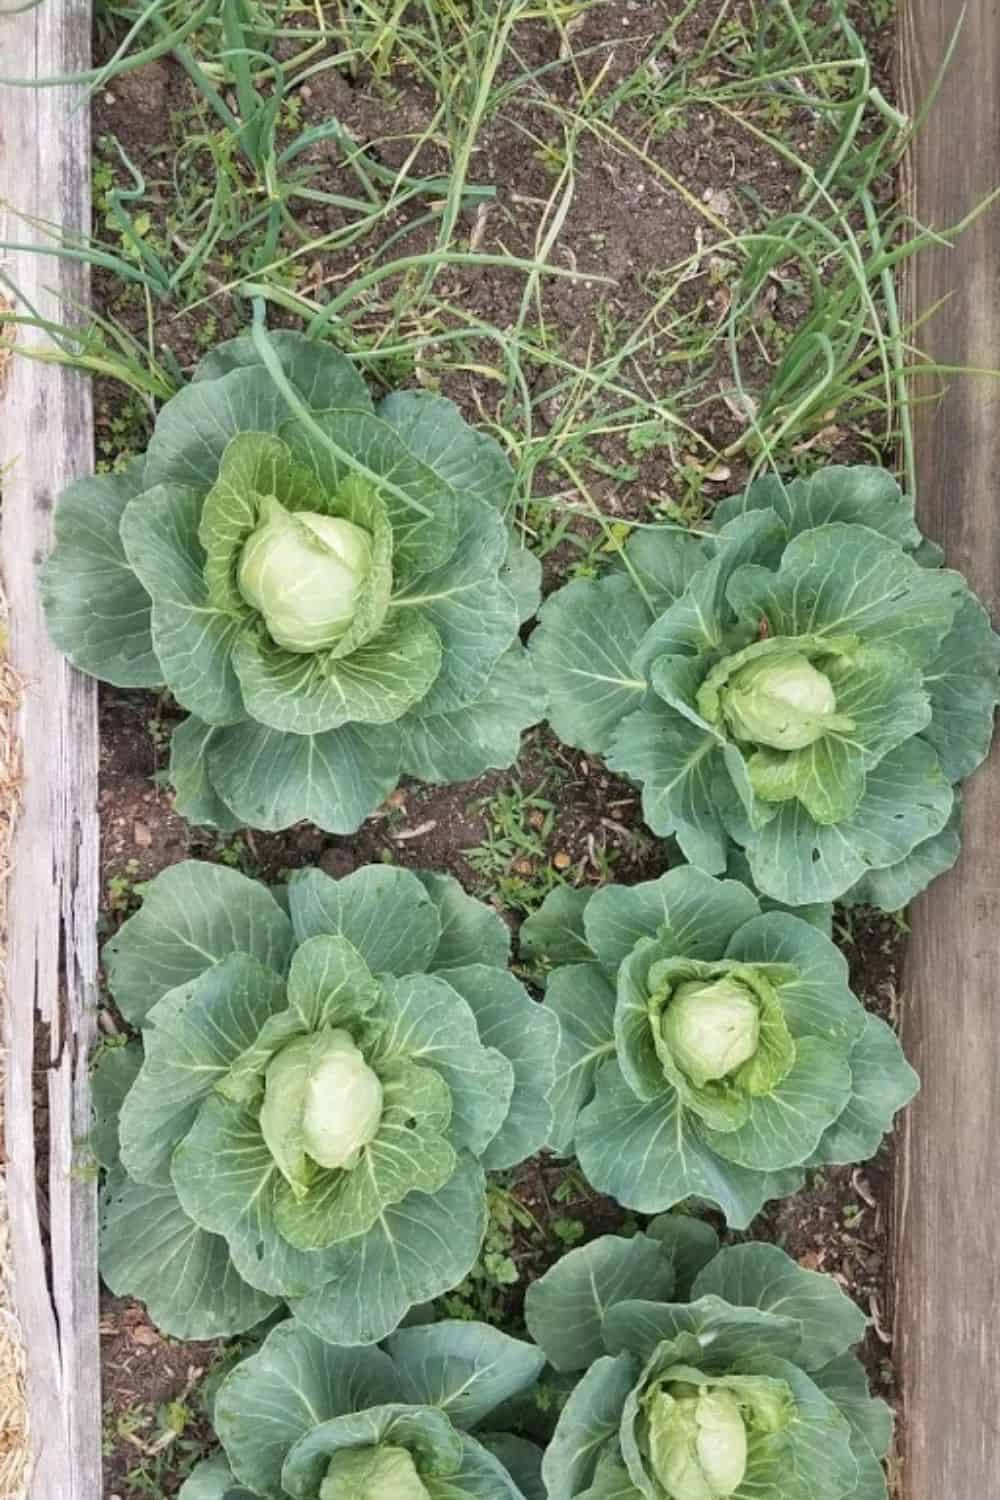 Cabbage and onions growing in a raised bed